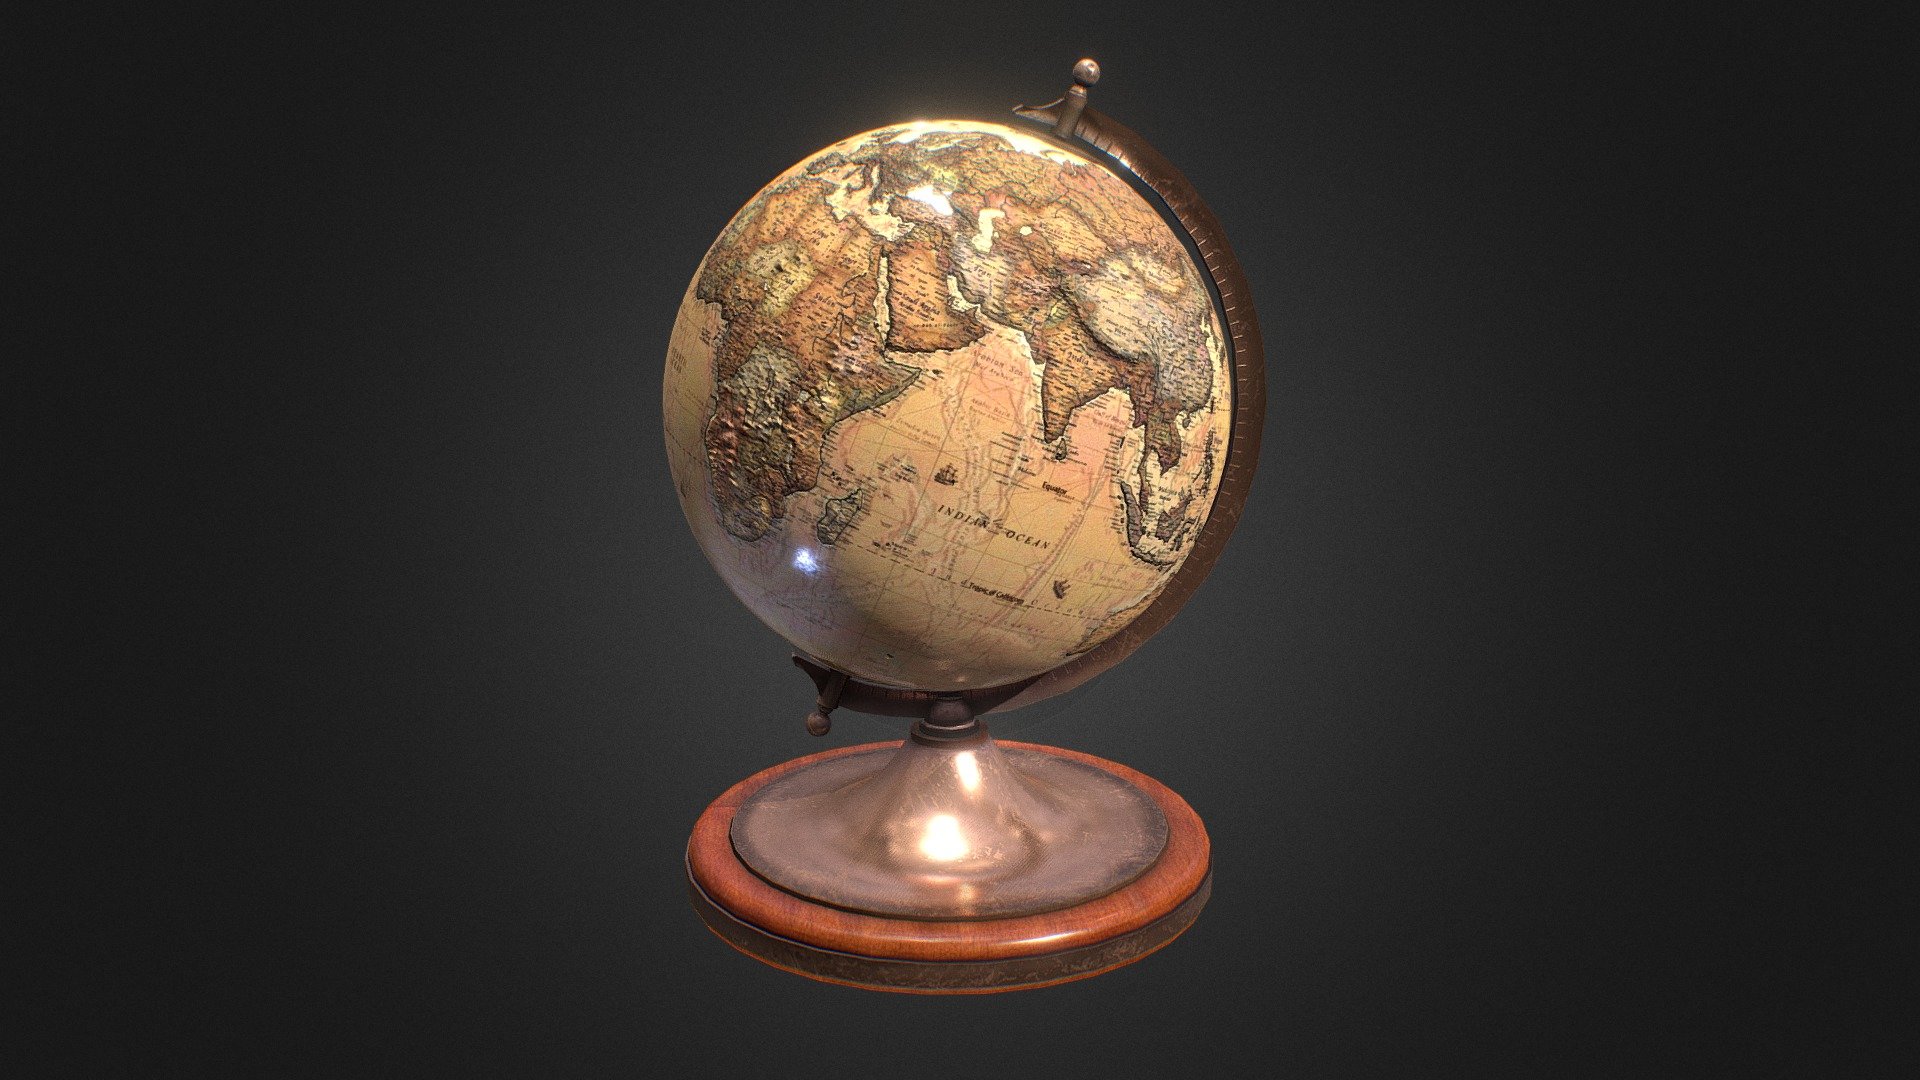 Rotating Antique World Globe
PBR Materials,
Basic rotation animation.
1k Textures as seen (ZIP file contains 4k Textures, displacement/heightmap for the sphere, and a static unanimated version), - Antique Globe (Animated;Rotating) - Buy Royalty Free 3D model by ArcticGreenhouse 3d model